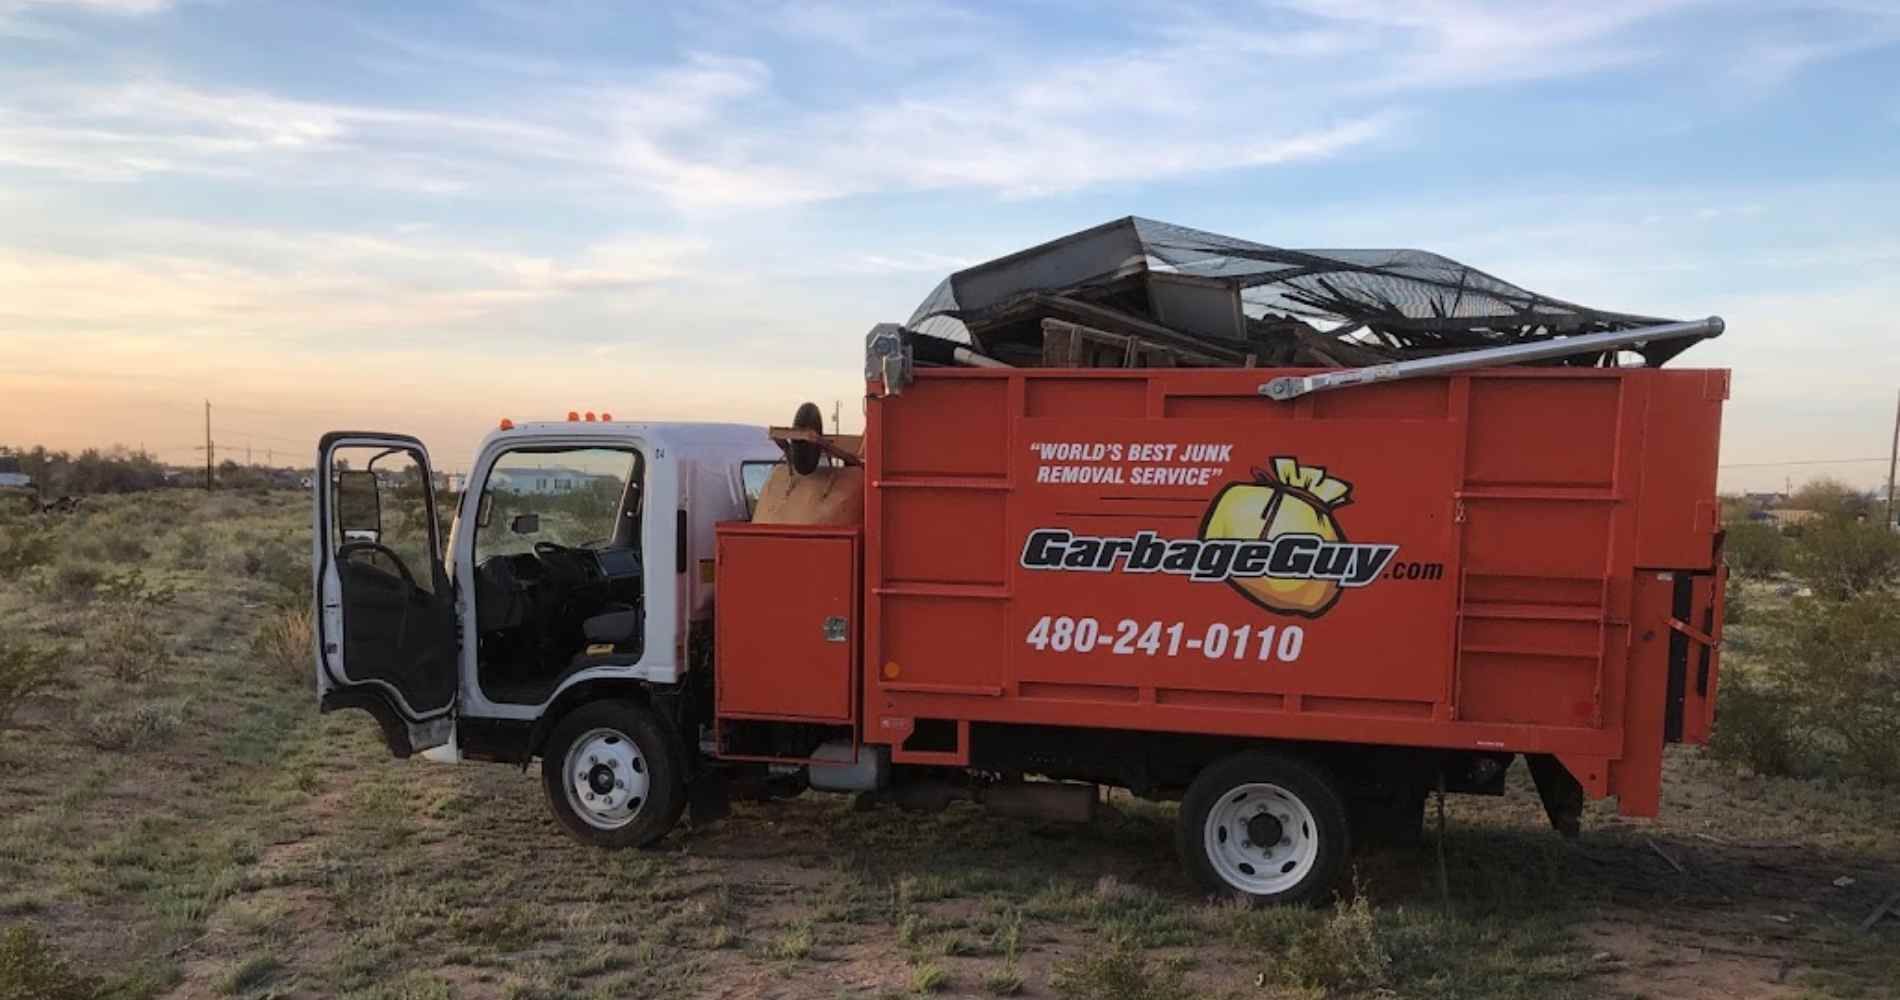 #1 for Junk Removal in Fountain Hills, AZ with Over 1200 5-Star Reviews!